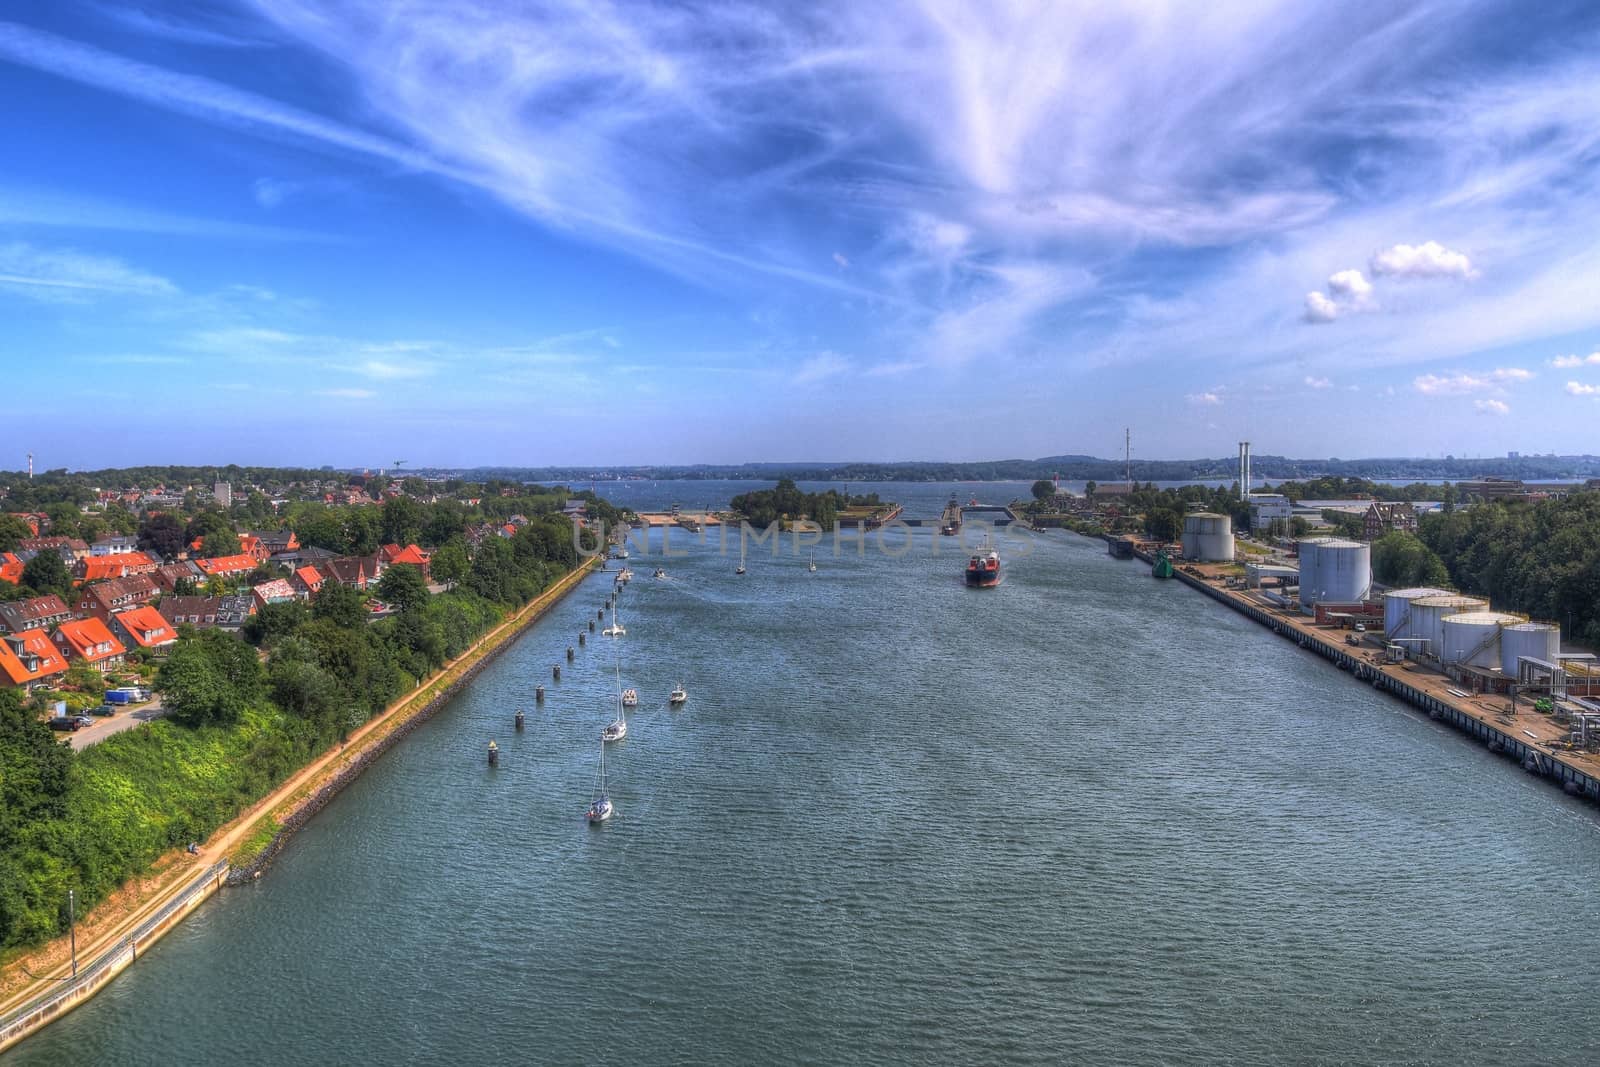 Different views at and from the big Kiel canal bridge in northern germany.